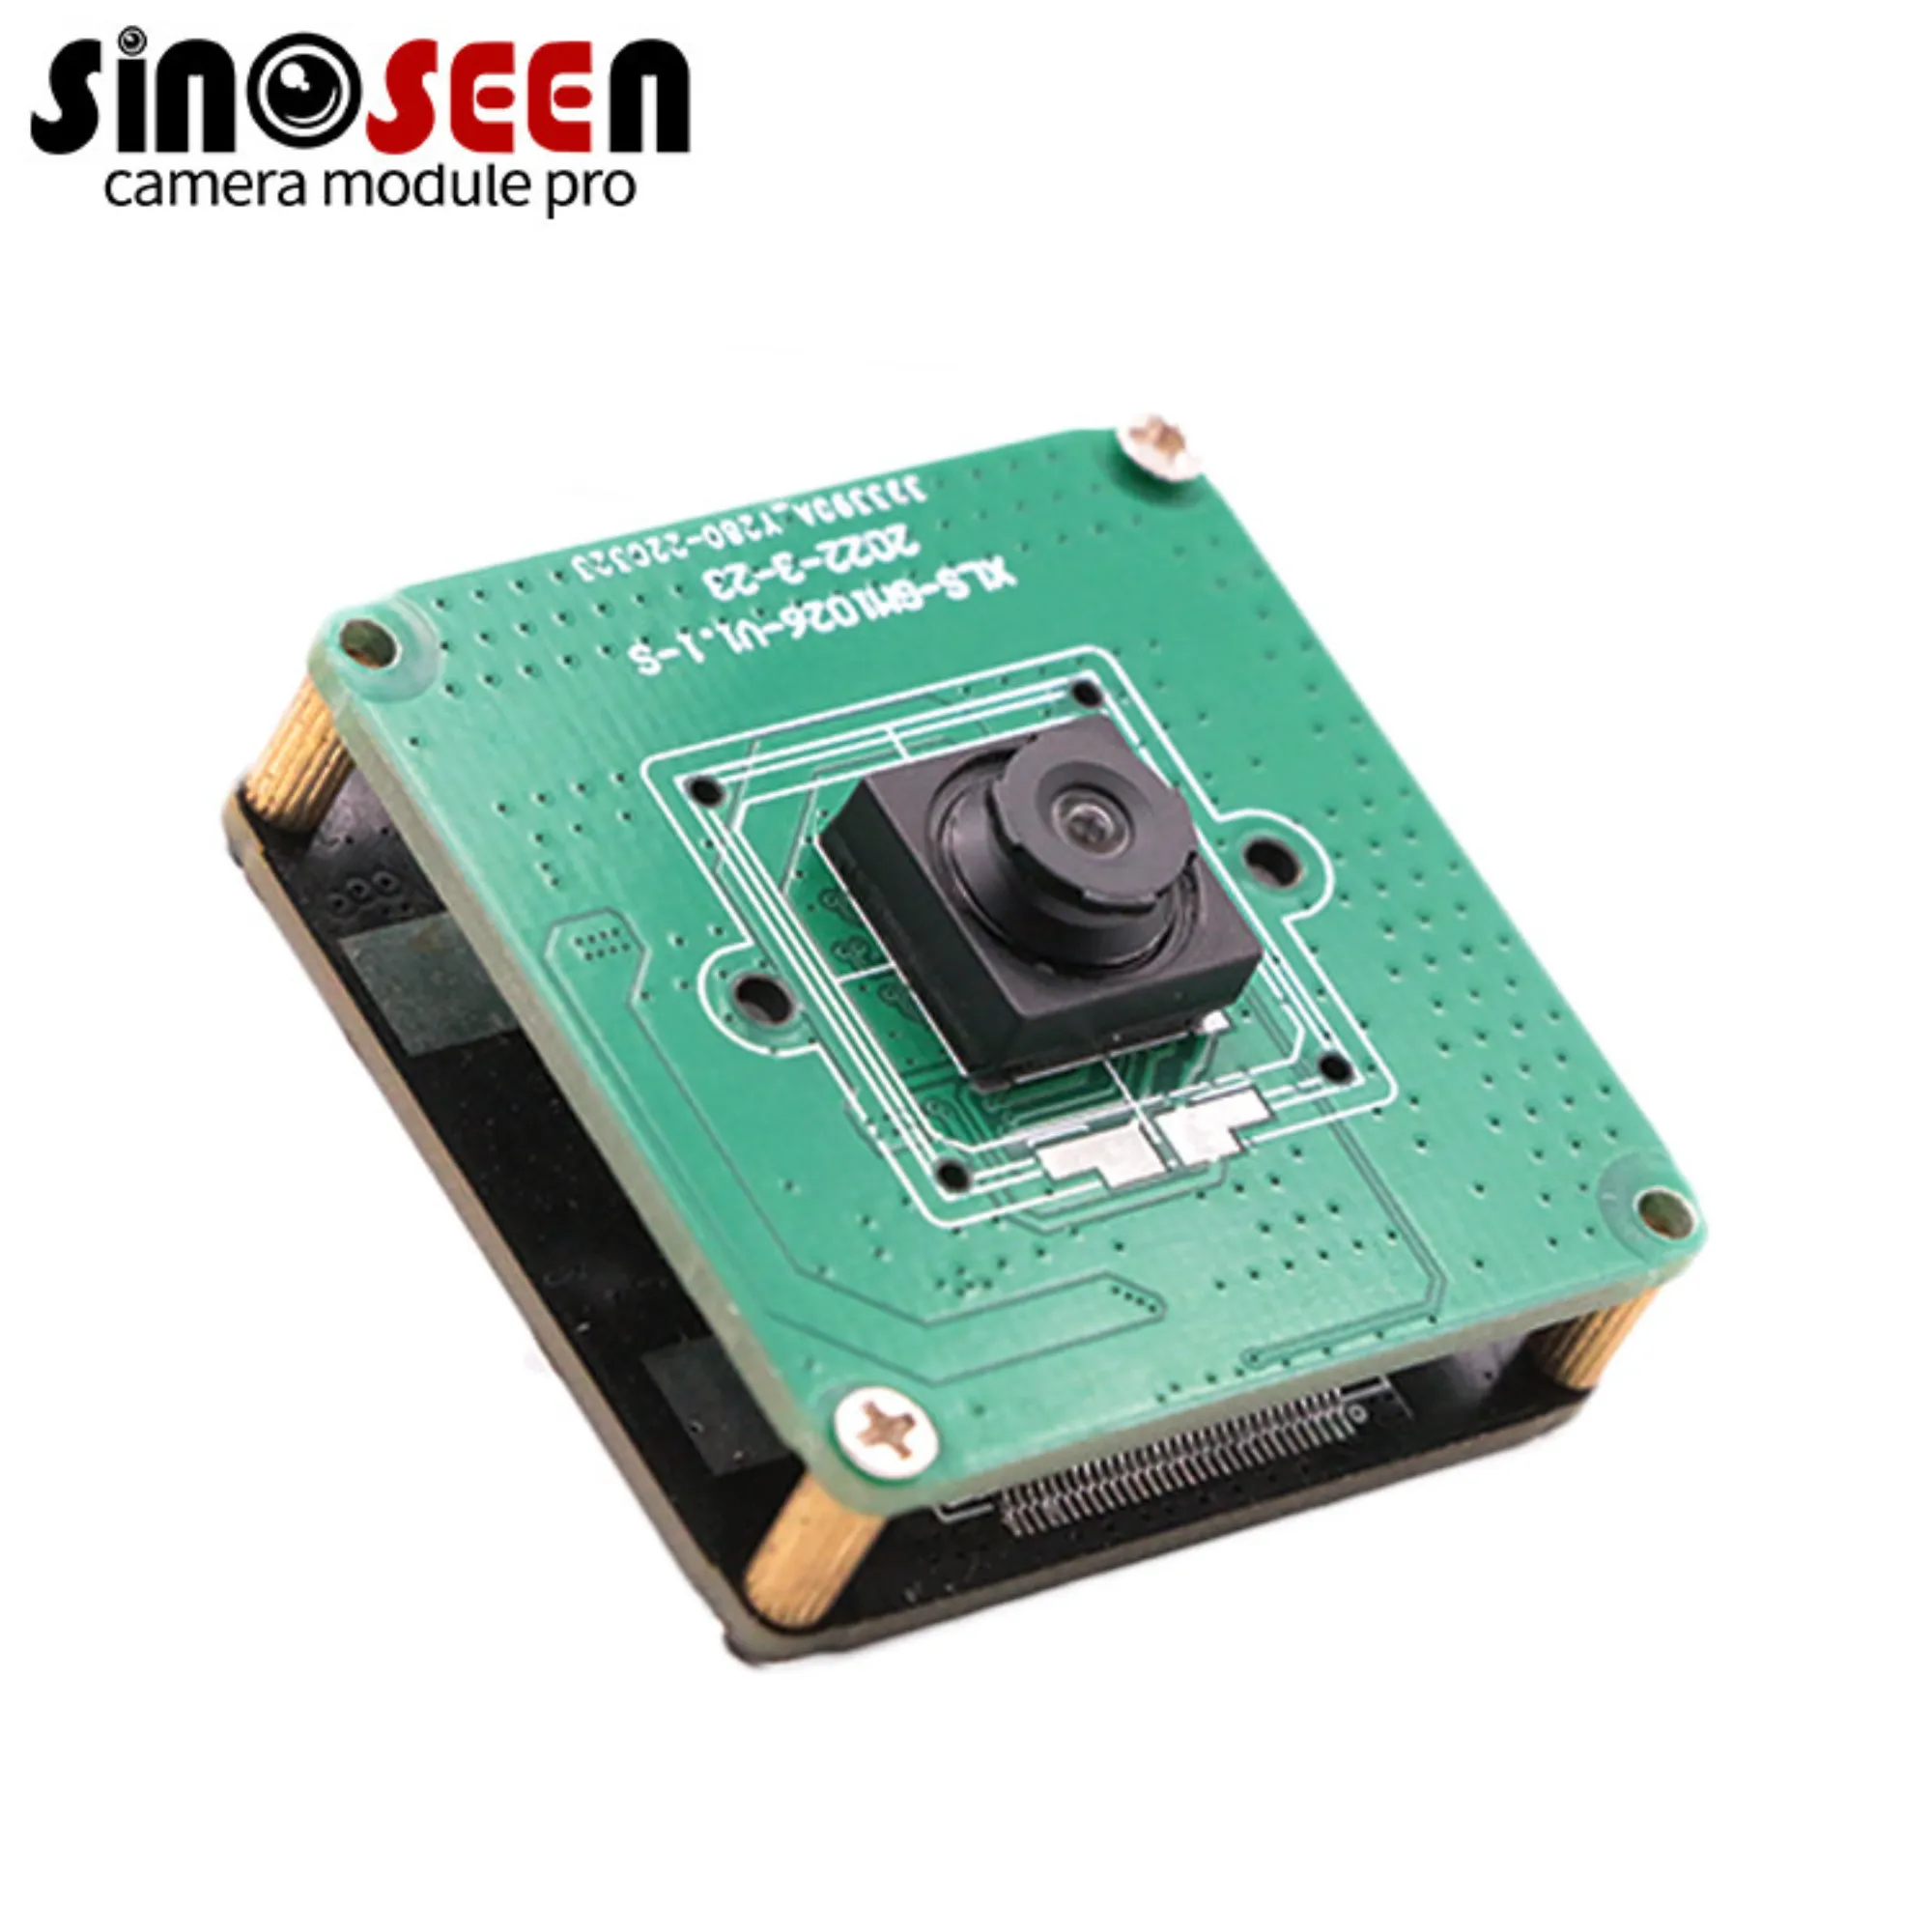 20MP OEM Large Area IMX230 USB Camera Module For High Speed Scanners